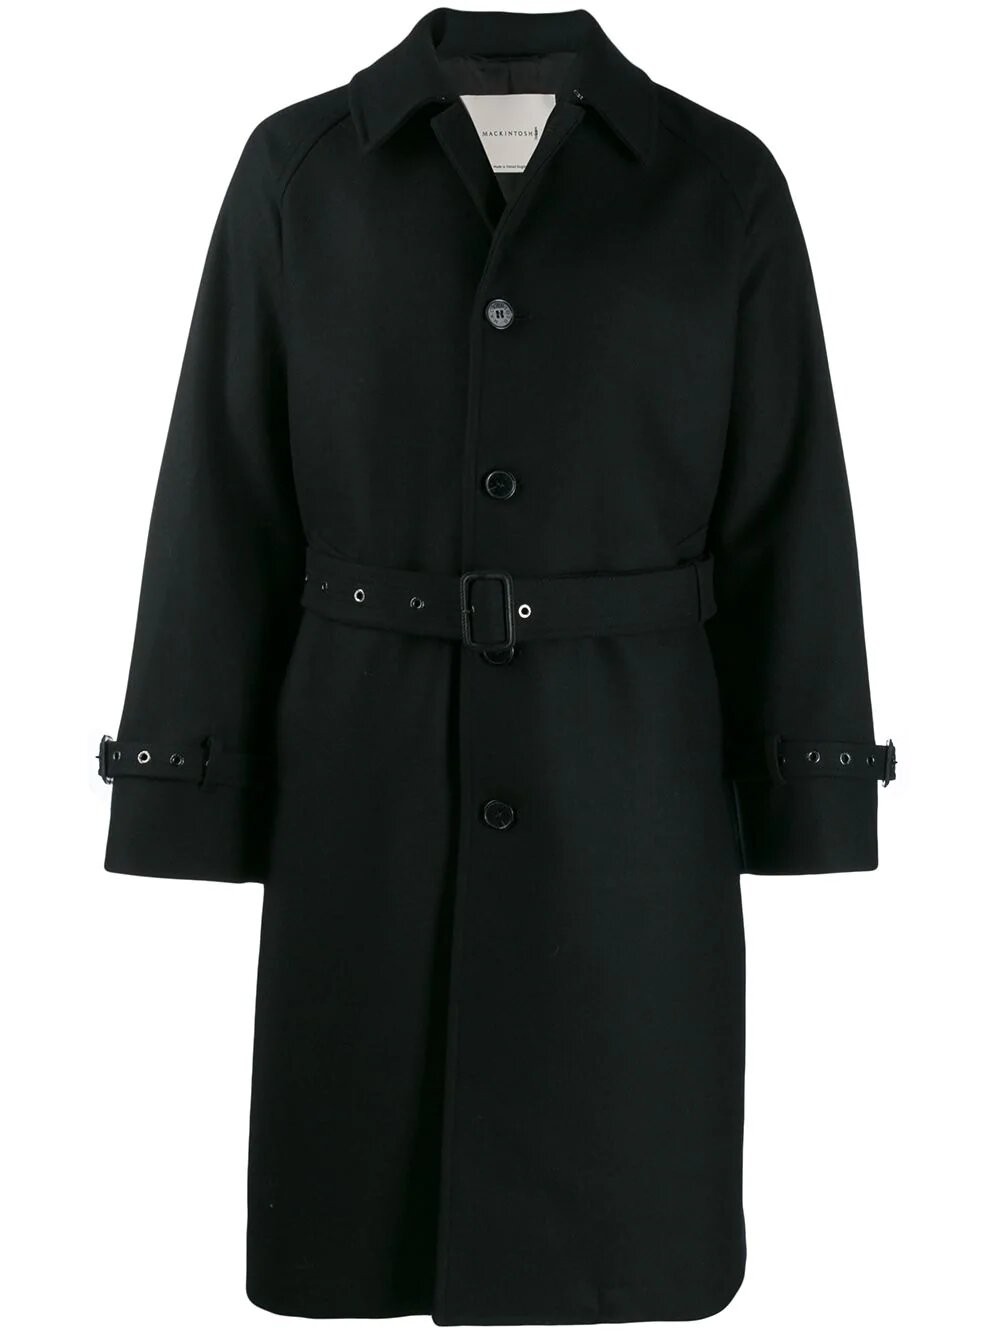 Mackintosh Whitburn GM-1015F Belted Coat MOP5125 MO3721 Black - New Collection Autumn Winter 2019 - 2020